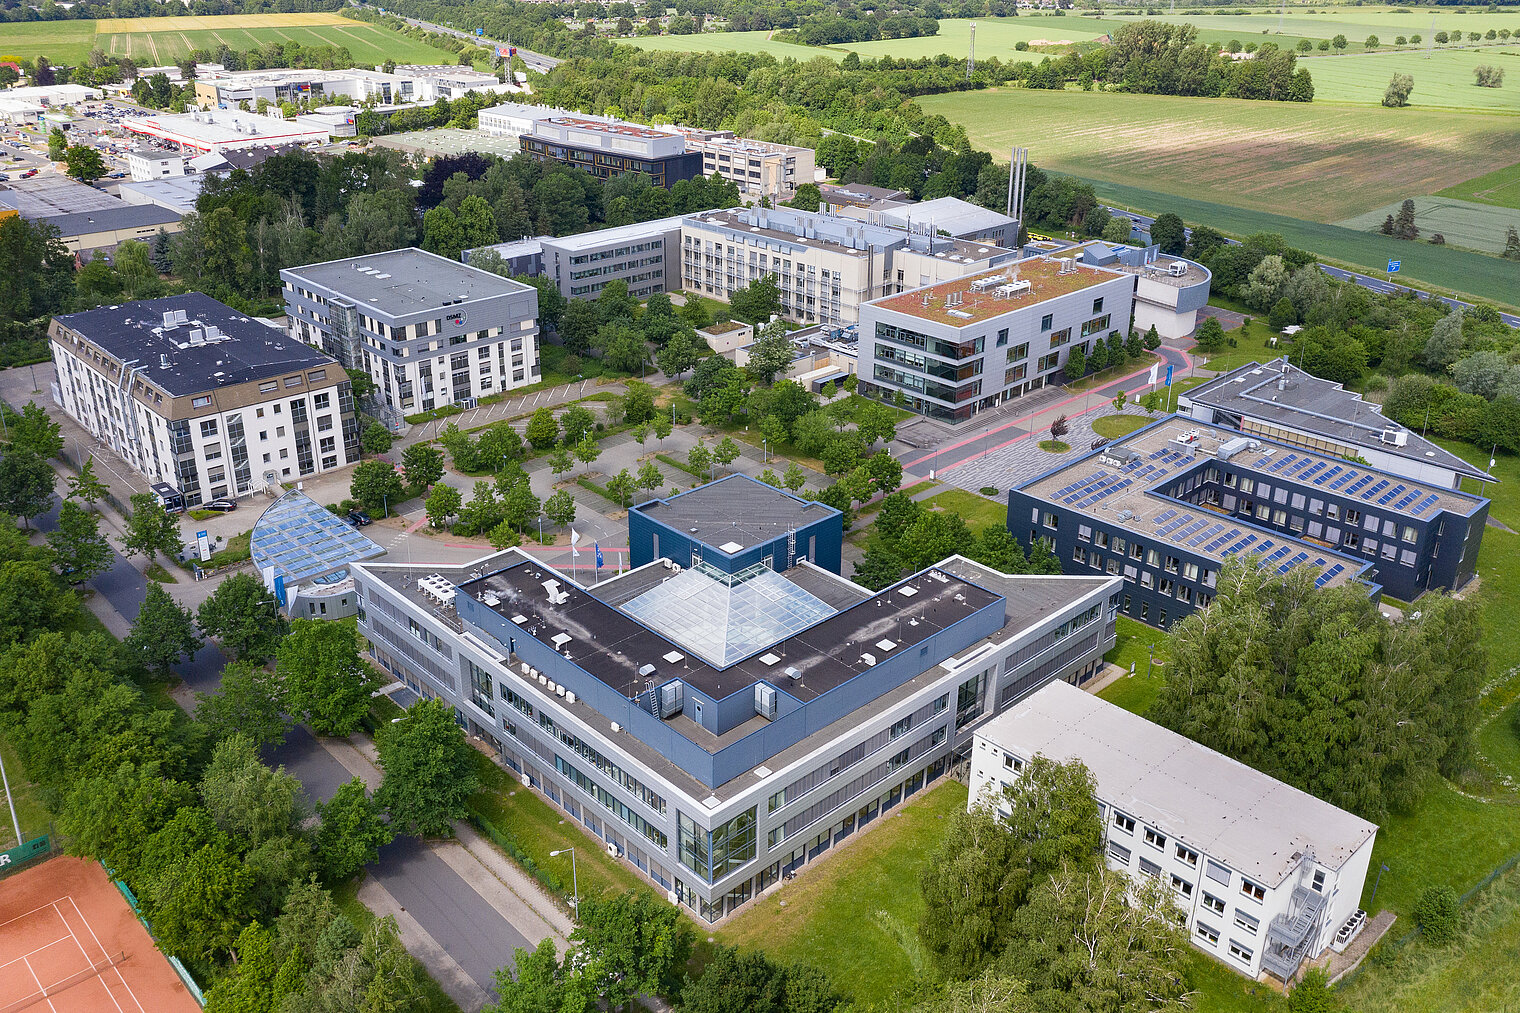 Aerial view of the HZI Campus